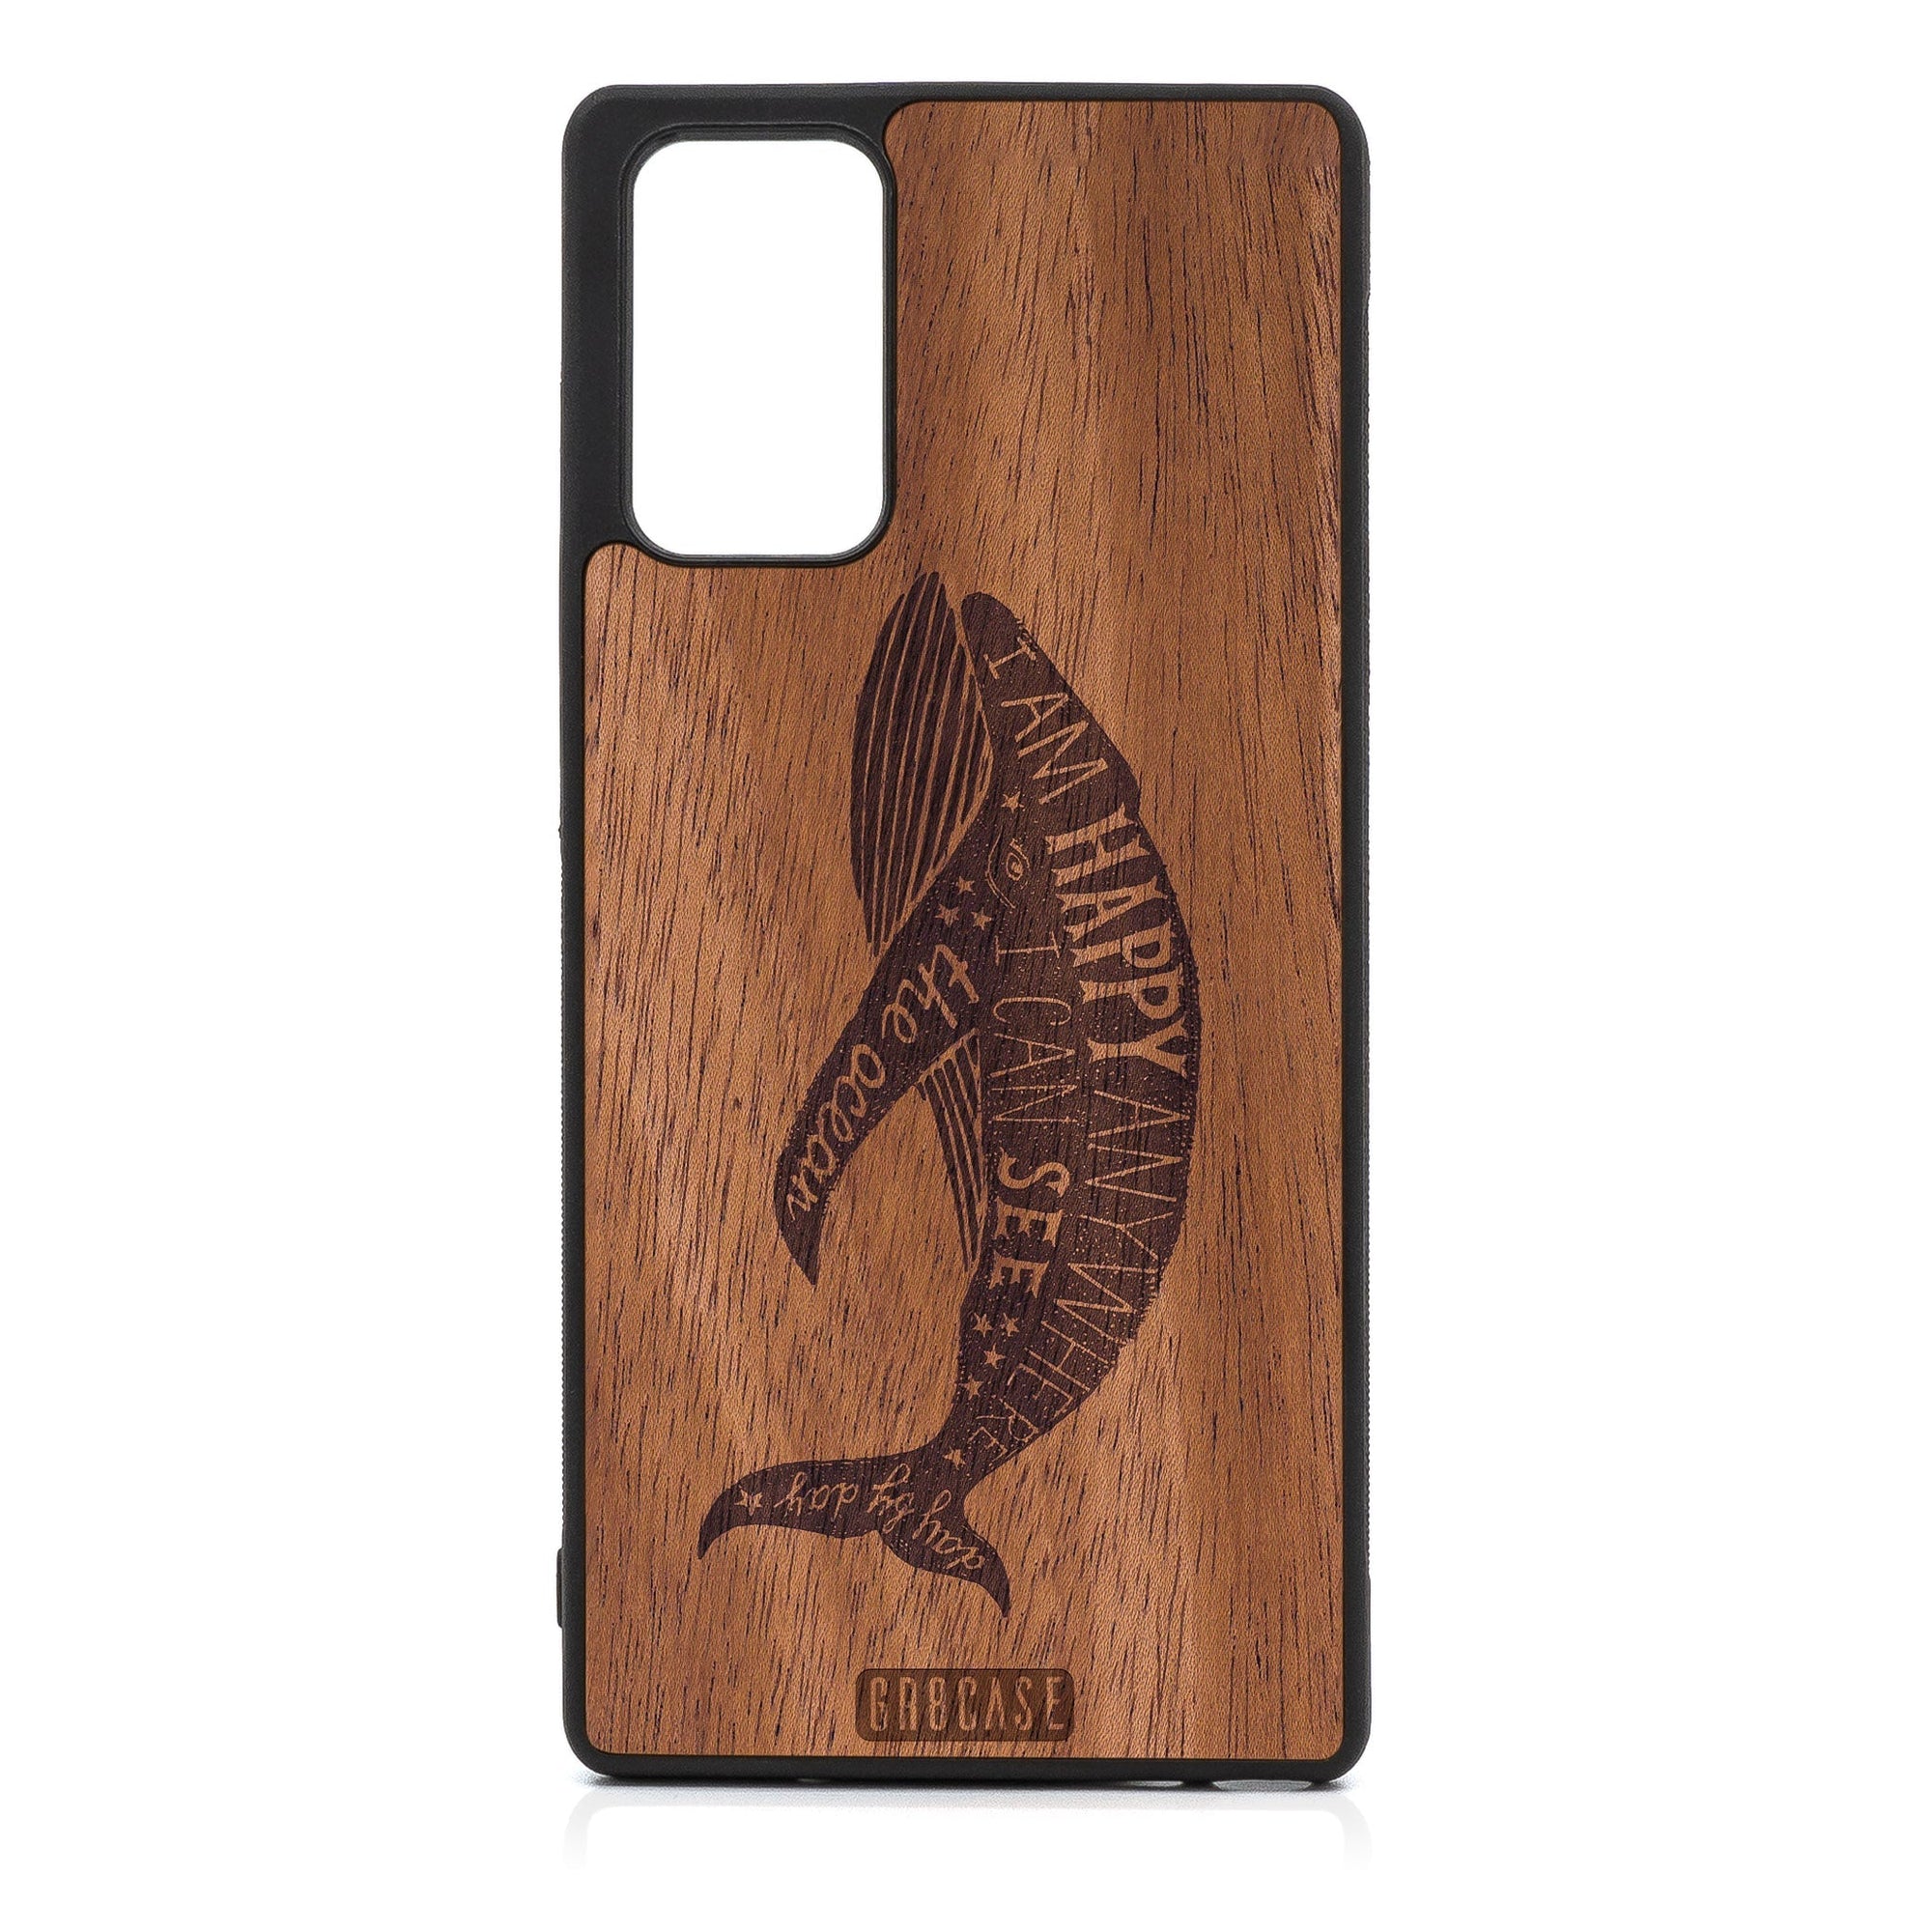 I'm Happy Anywhere I Can See The Ocean (Whale) Design Wood Case For Samsung Galaxy A53 5G